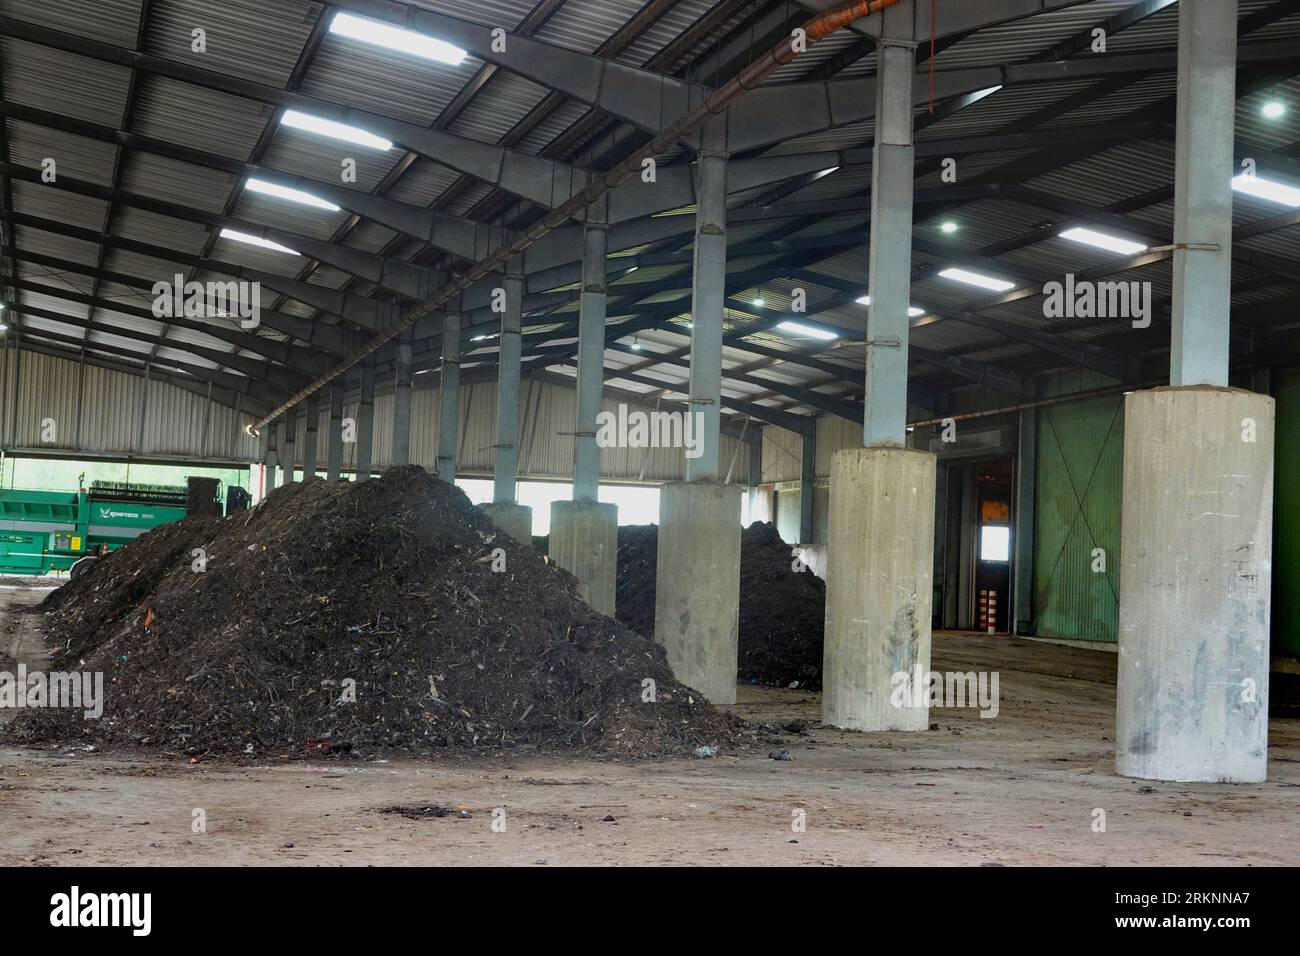 Waste management centre - compost heap before screening, Germany Stock Photo